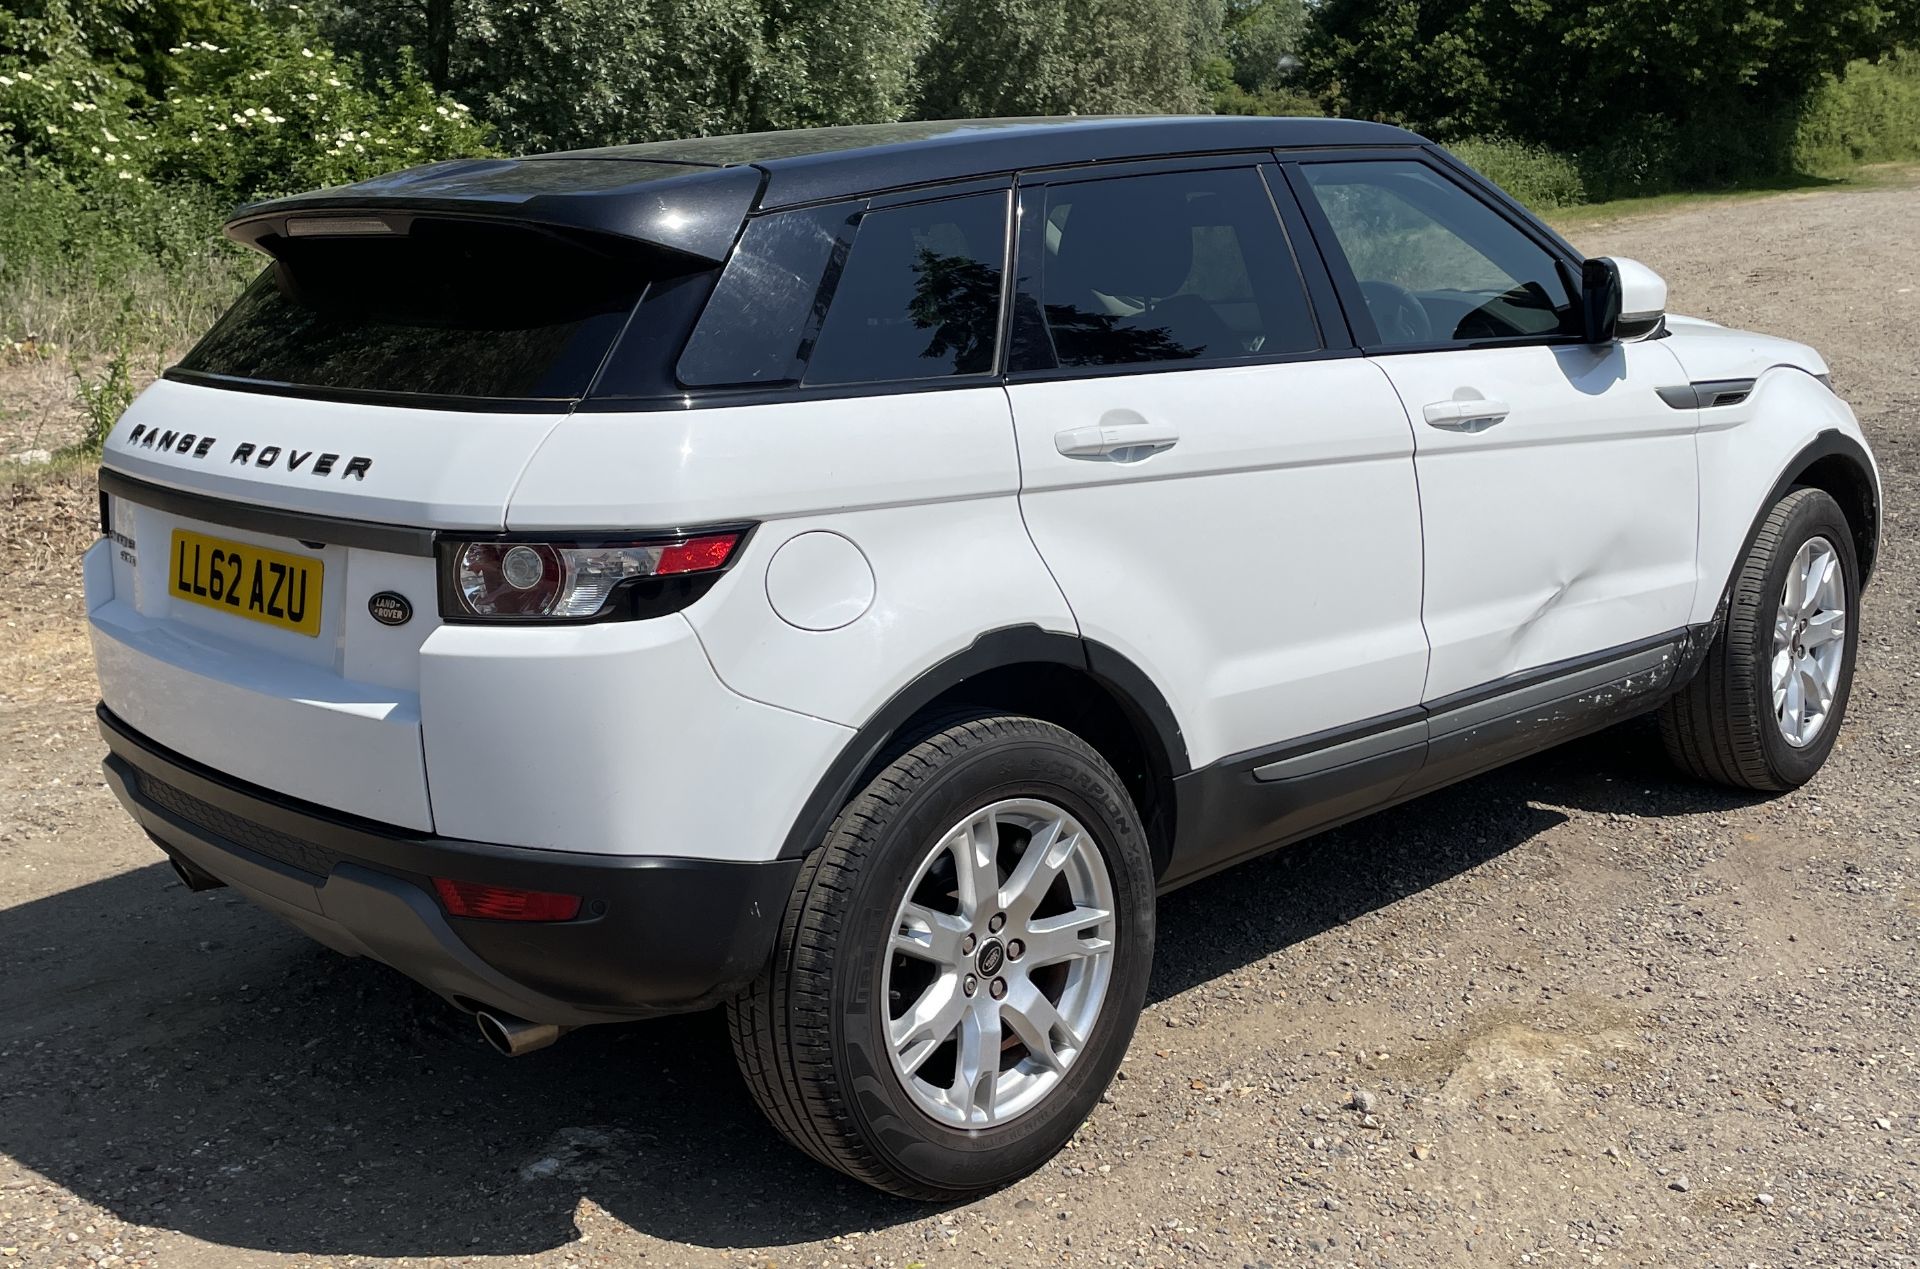 Land Rover Range Rover Evoque, Hatchback, 2.2 Sd4 Pure 5dr Auto [Tech Pack], Registration LL62 - Image 3 of 26